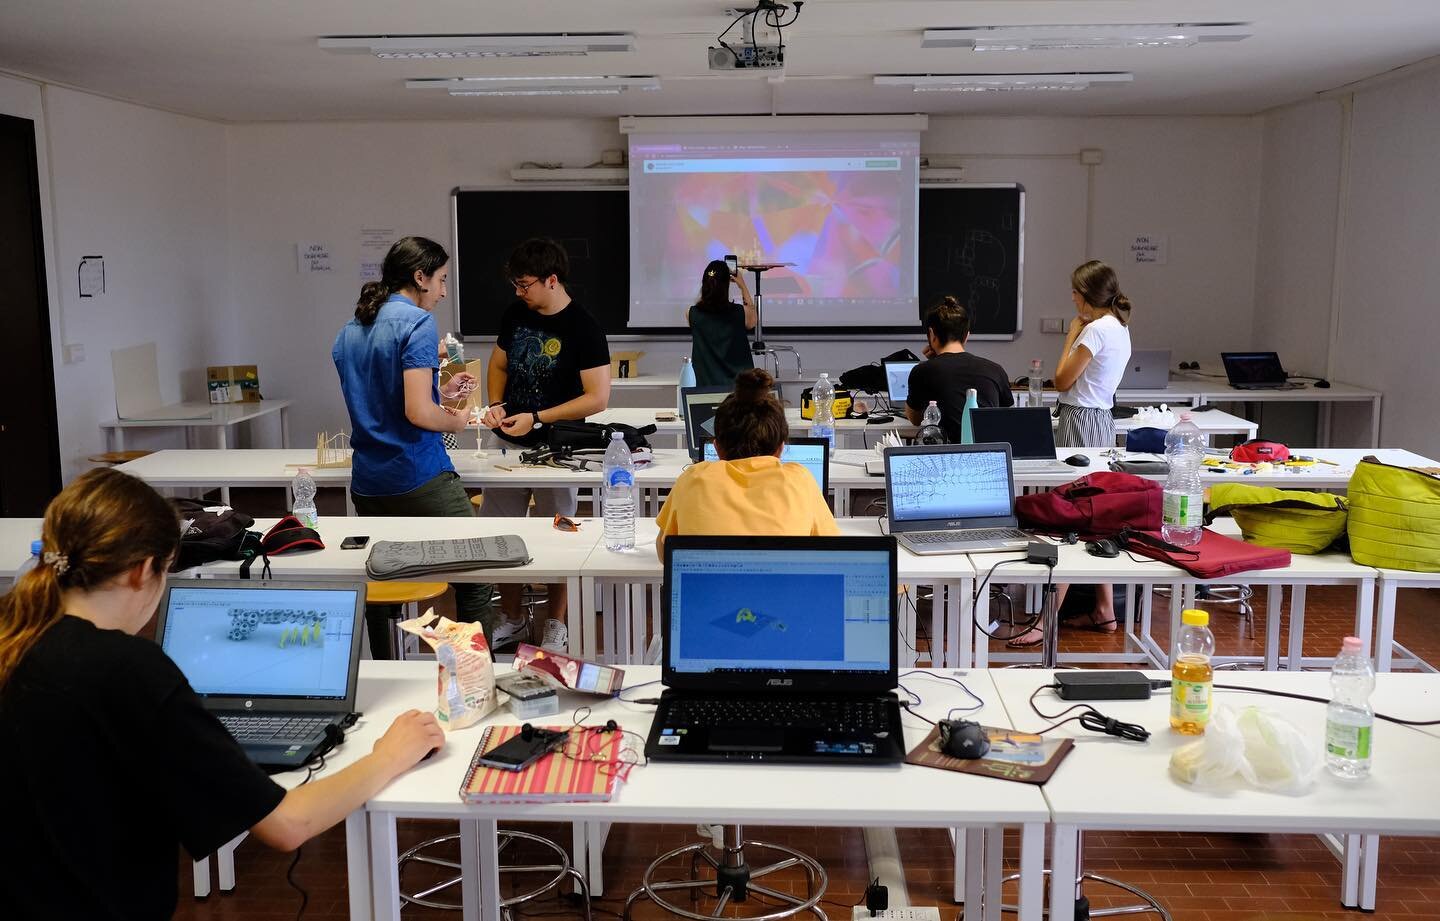 More process photos from the Collaborative Cognitive Objects Workshop we&rsquo;ve just finished in collaboration with @ieapisa @unipisa. Thank you for inviting us for the 6th year in a row and a special thank you to the wonderful prof.ing. Marco Gior